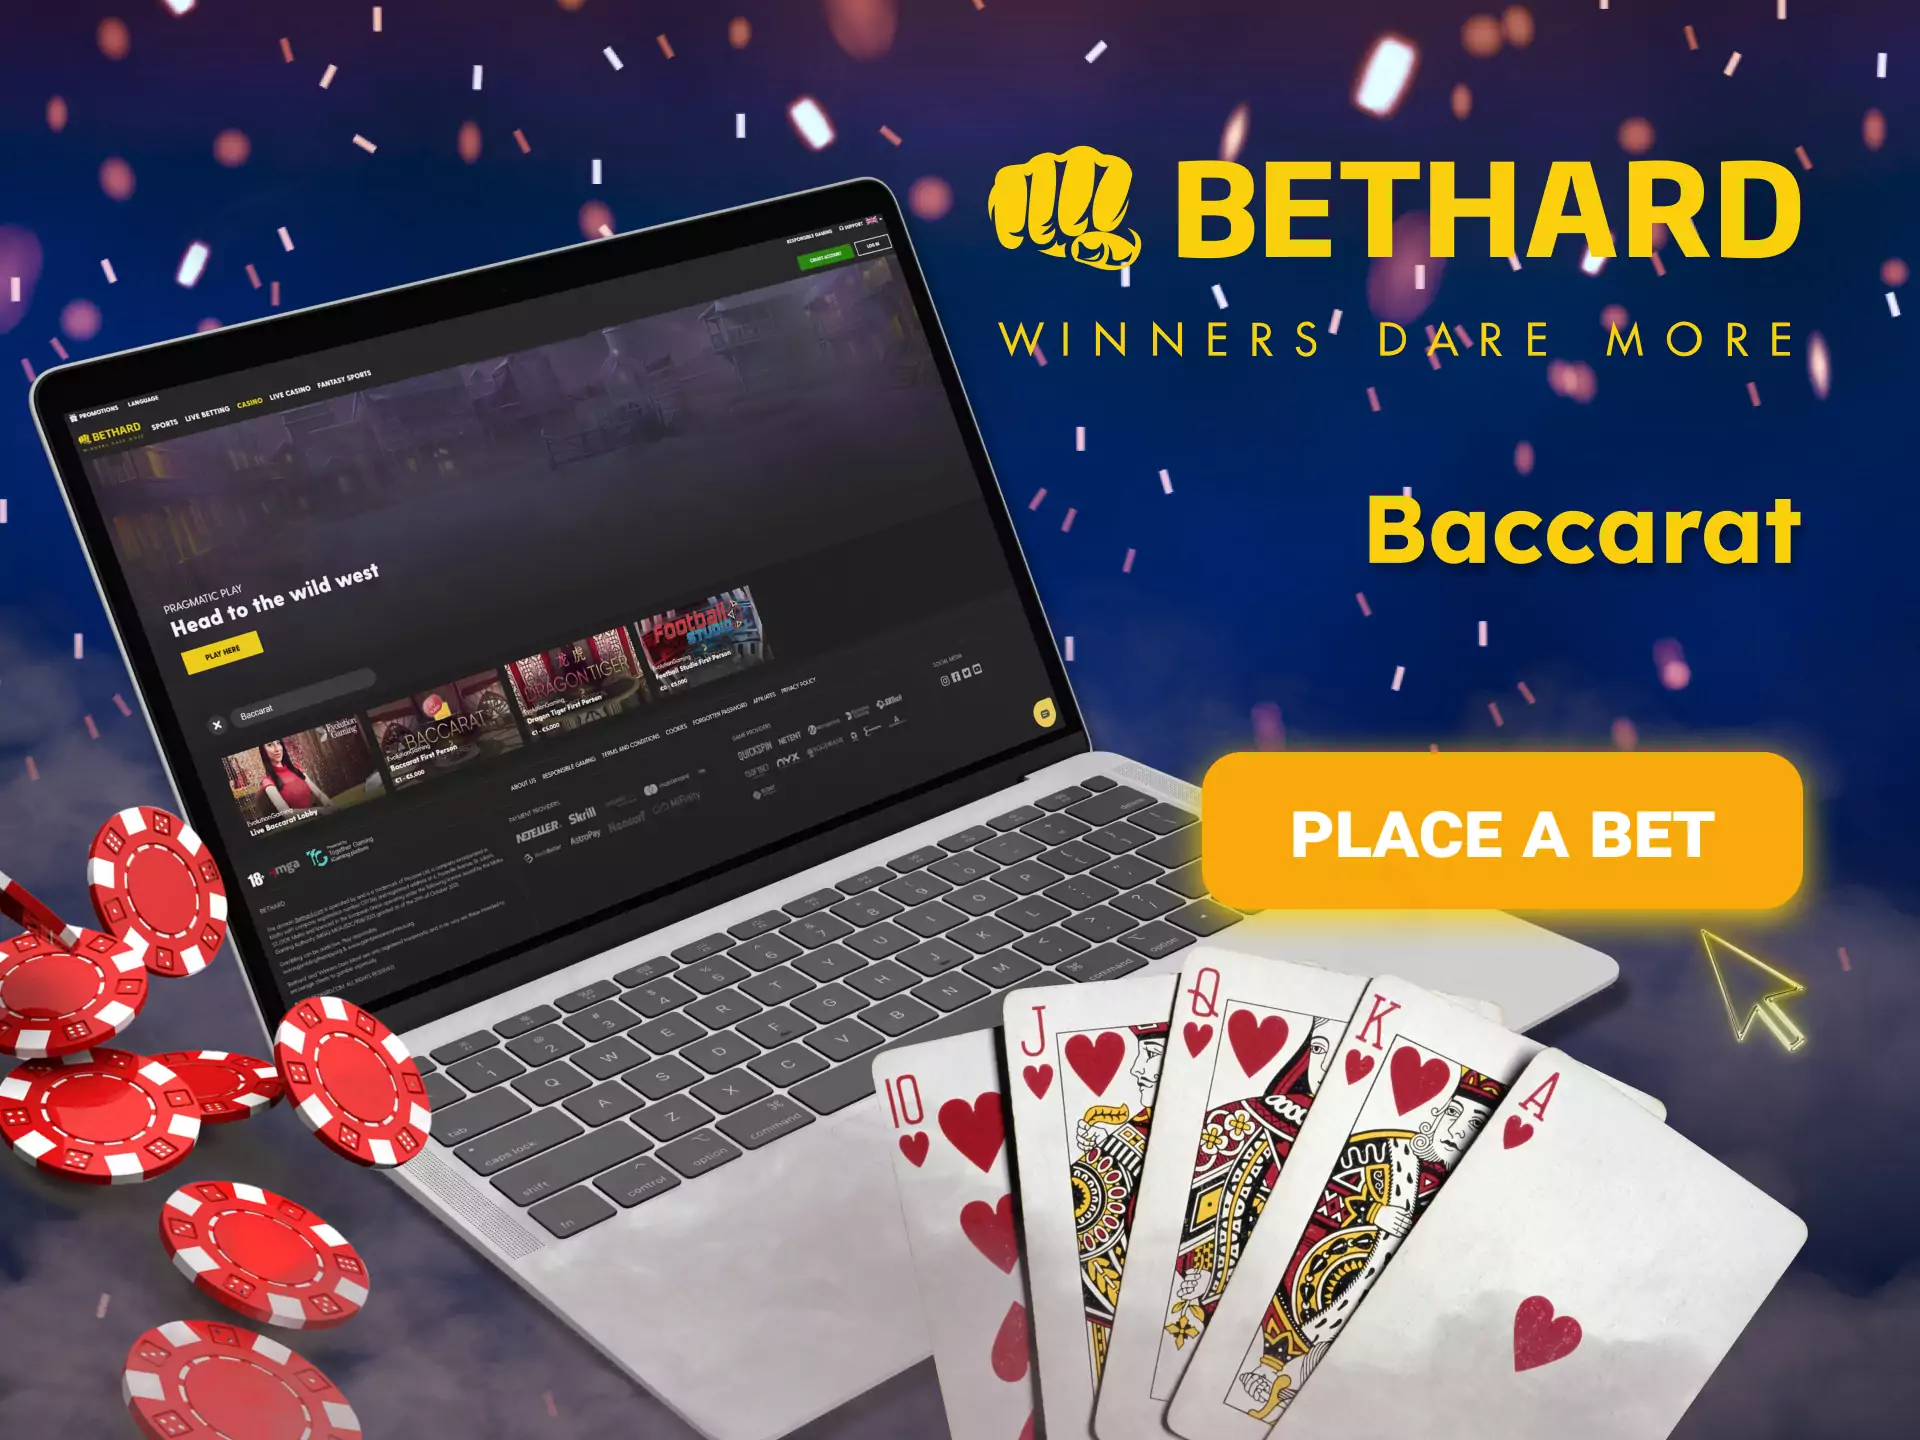 If you like card games, try baccarat at the Bethard online casino.